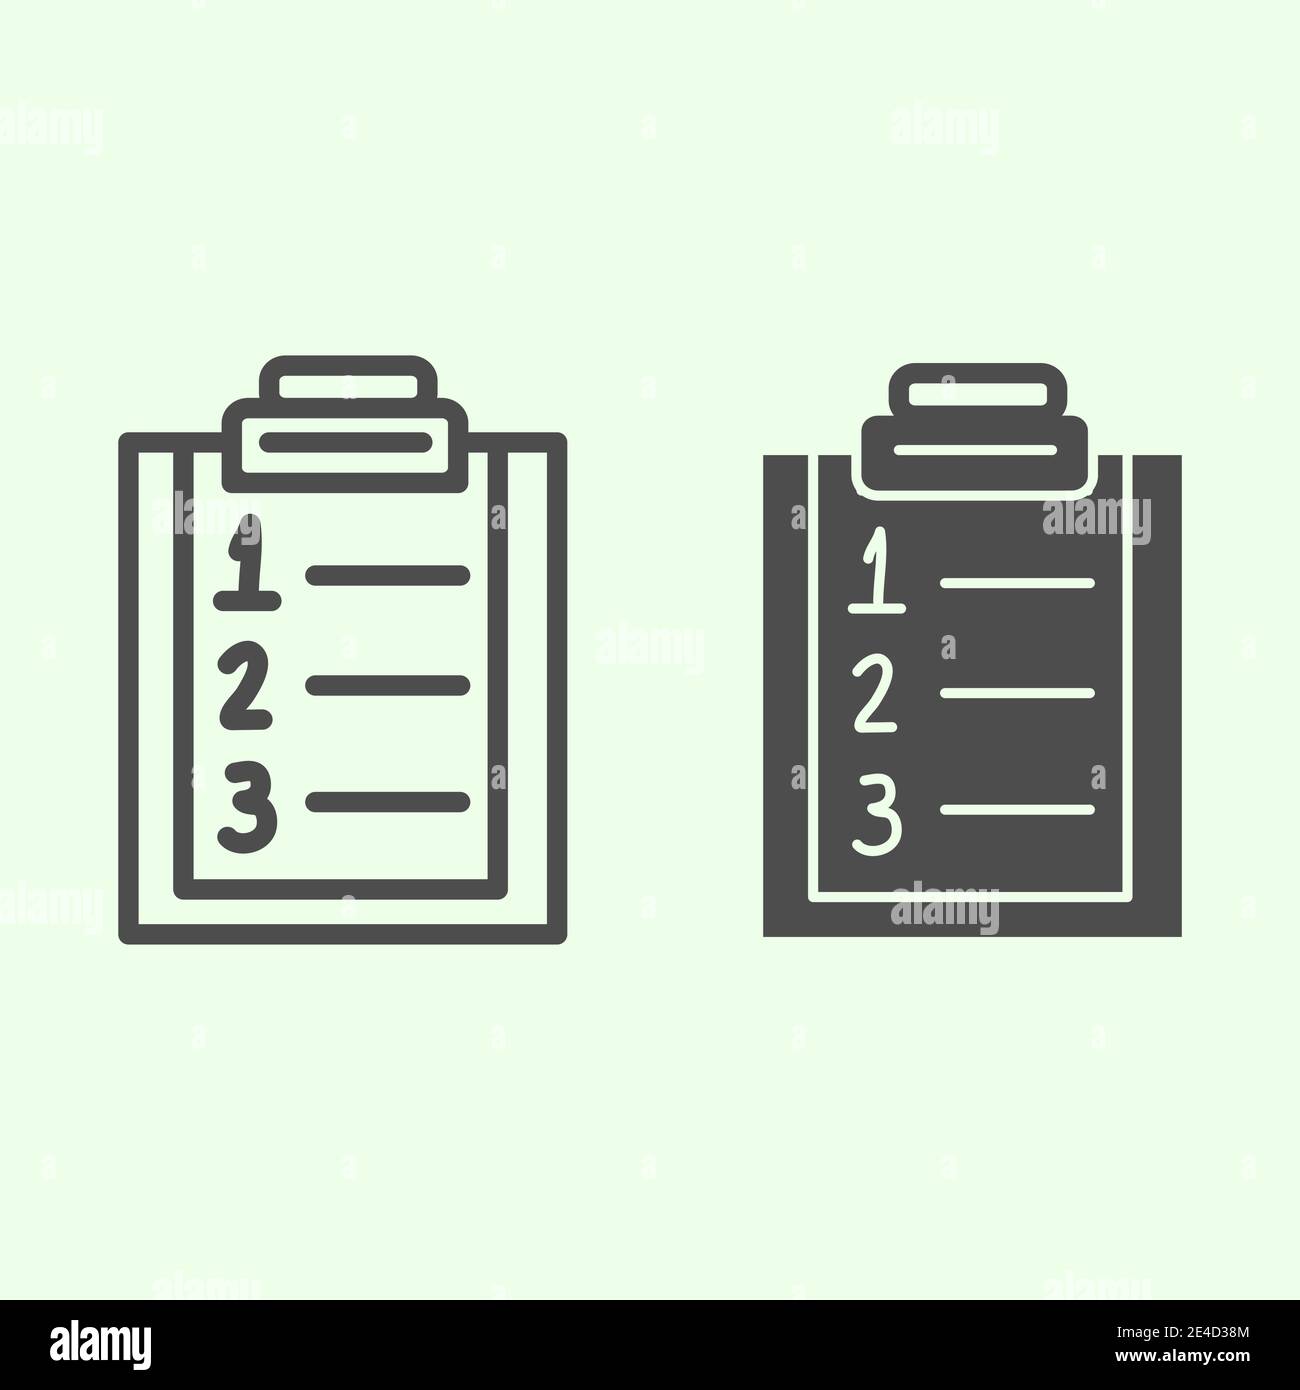 Plan list line and solid icon. Checklist with ranking numbers on clipboard outline style pictogram on white background. Numbered to do plan for mobile Stock Vector